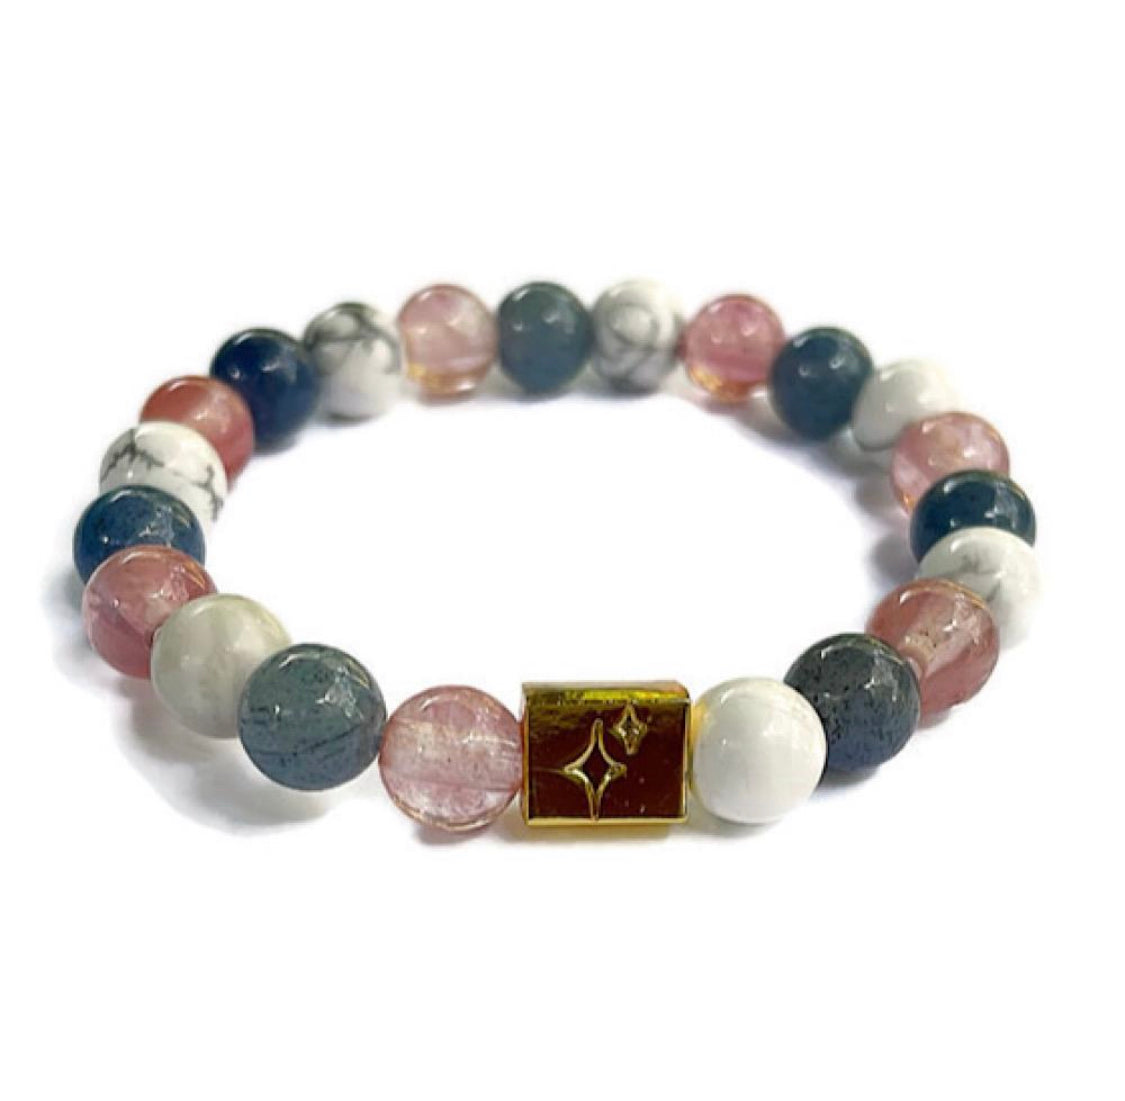 Beaded Bracelet: Pink, Blue, and White